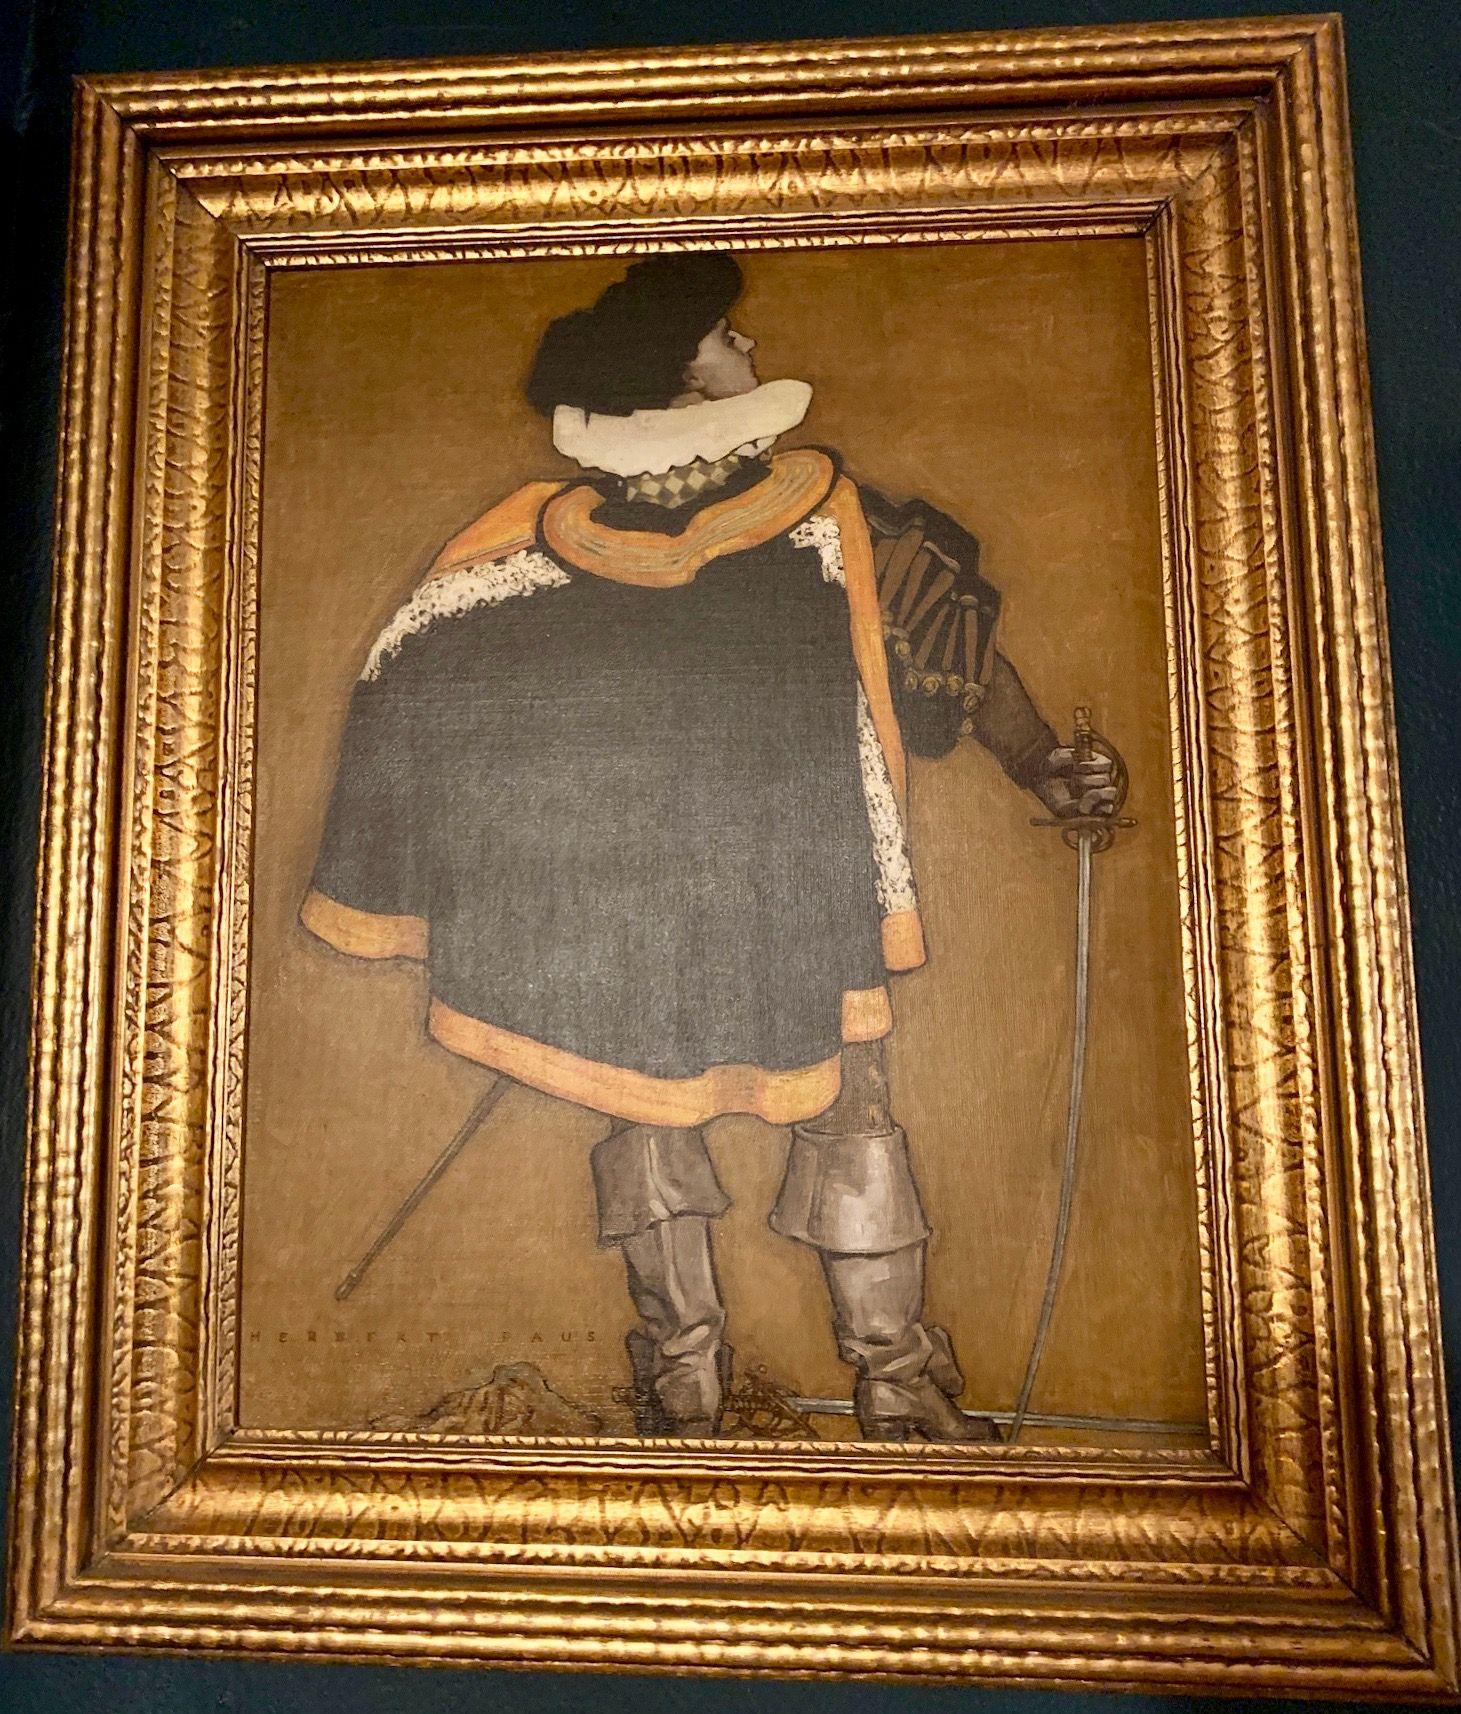 Cavalier Man with Sword - Painting by Herbert Andrew Paus